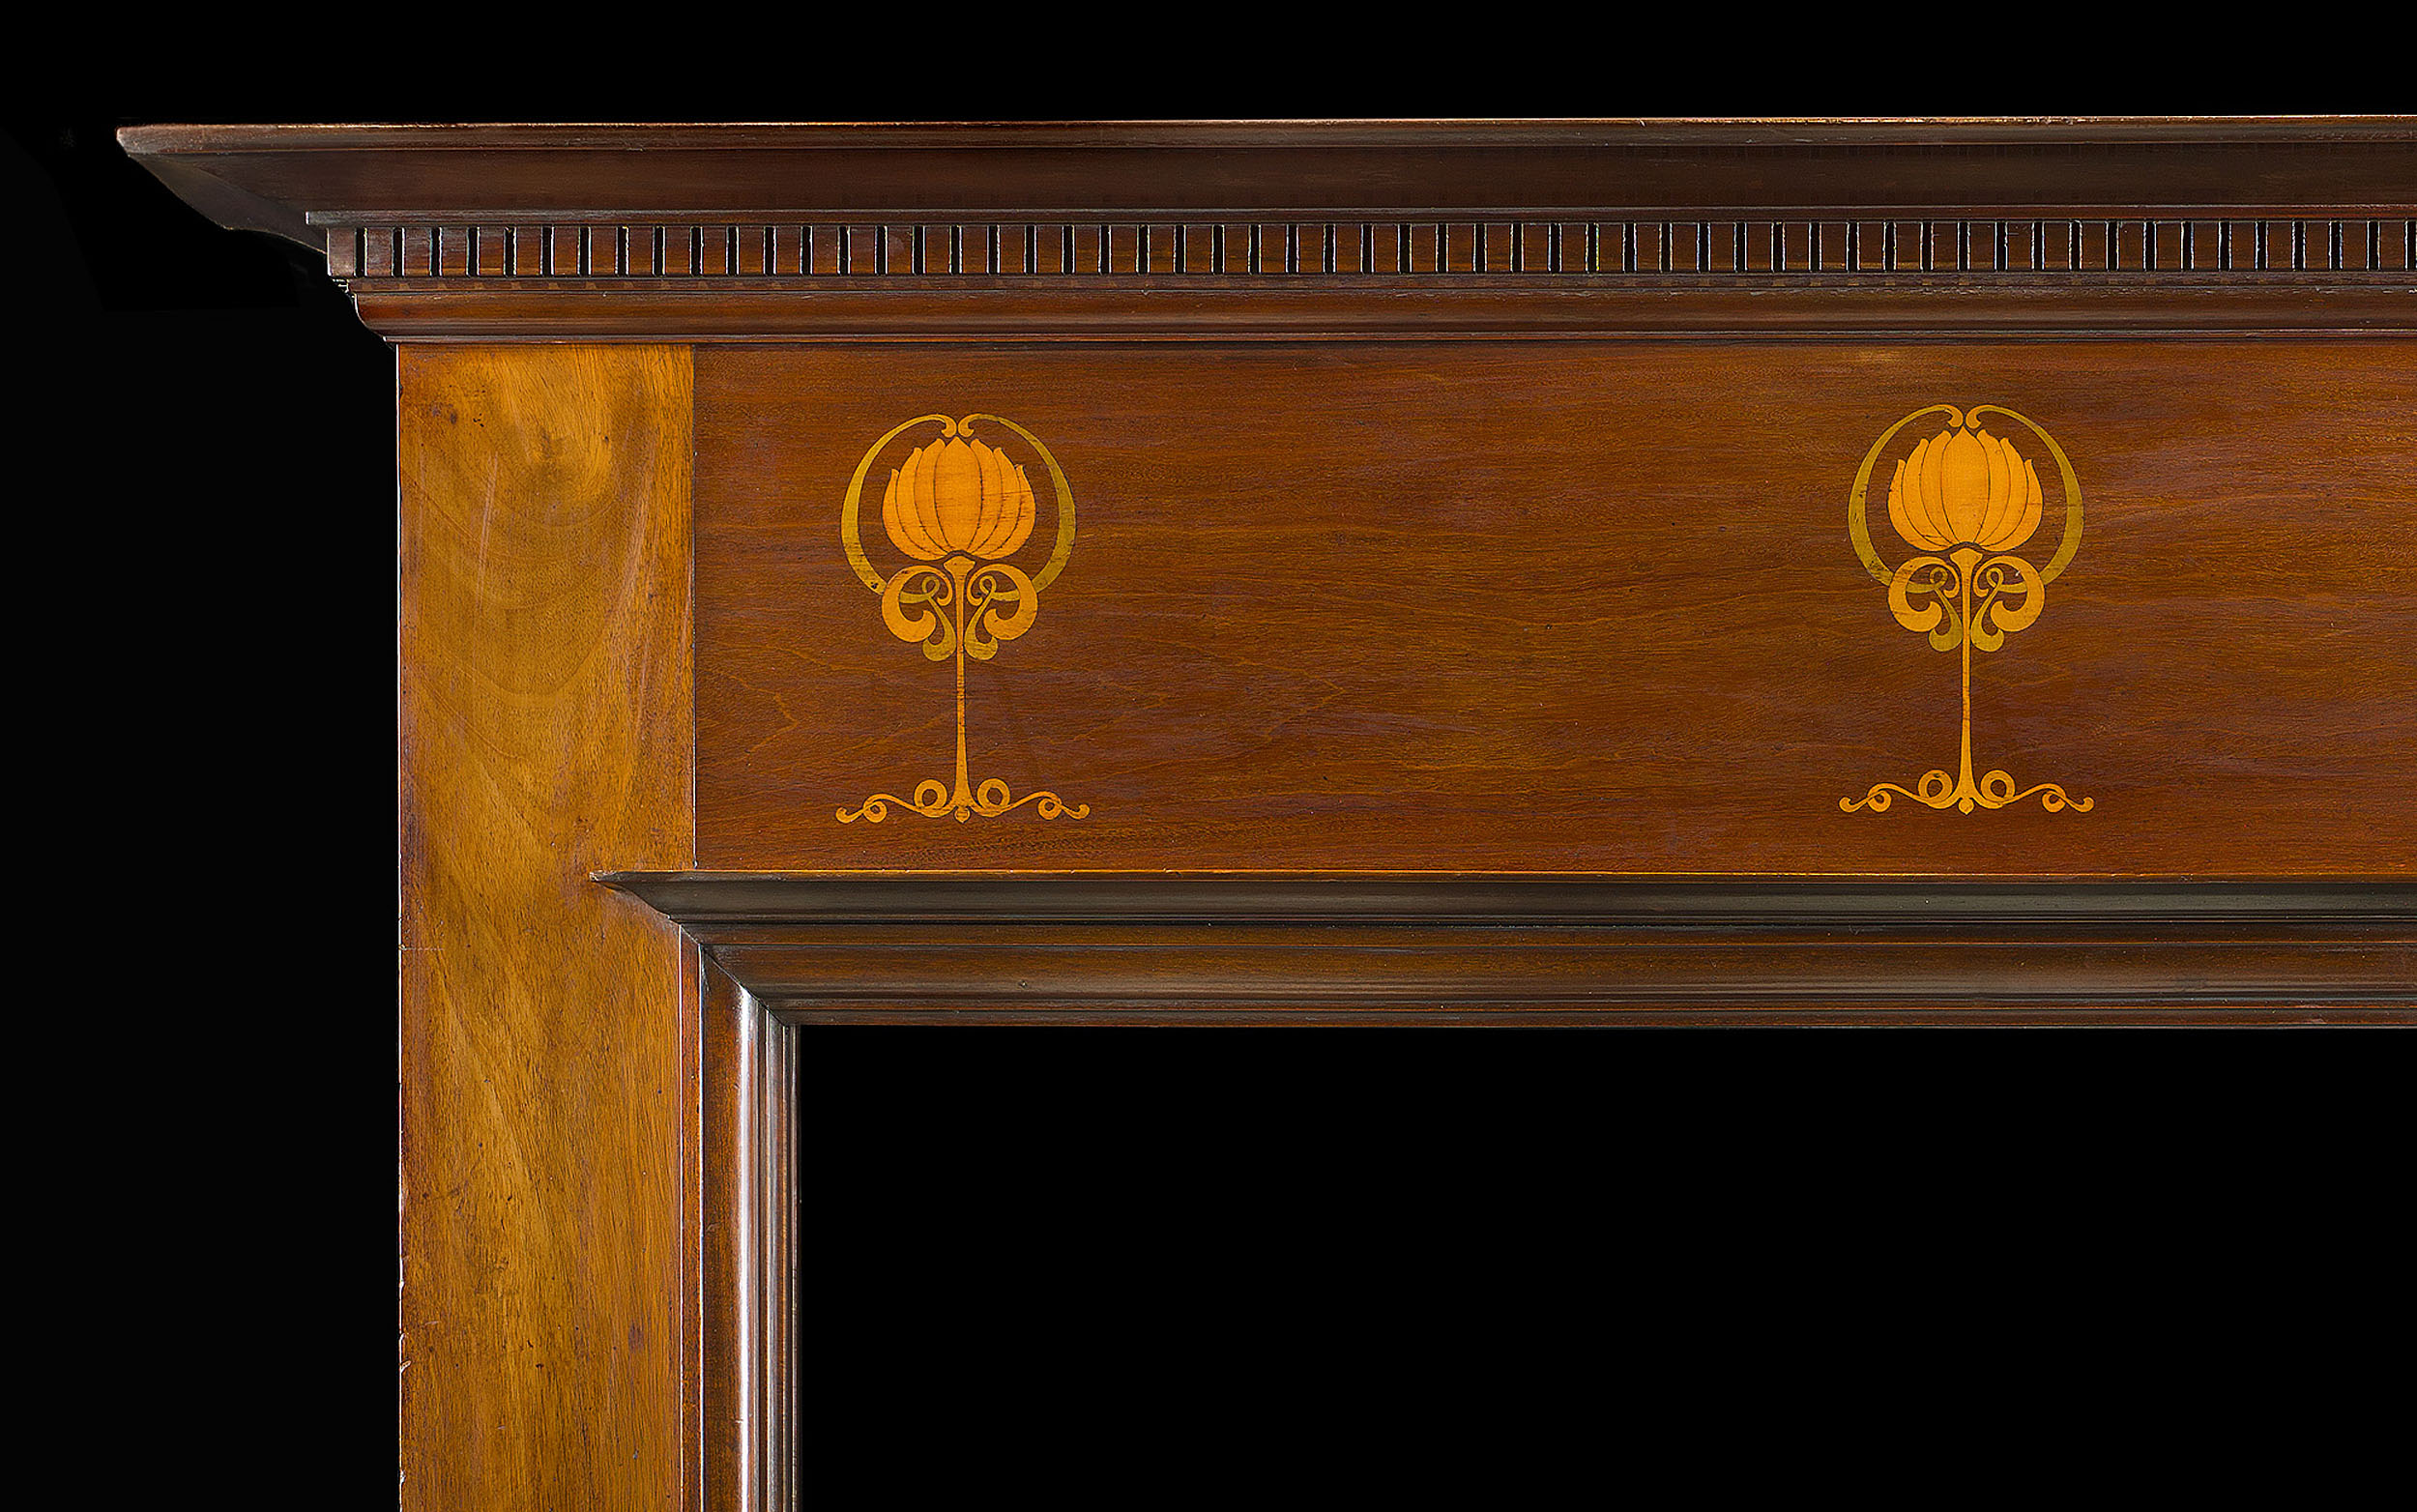 An Edwardian Inlaid Marquetry Fire Surround